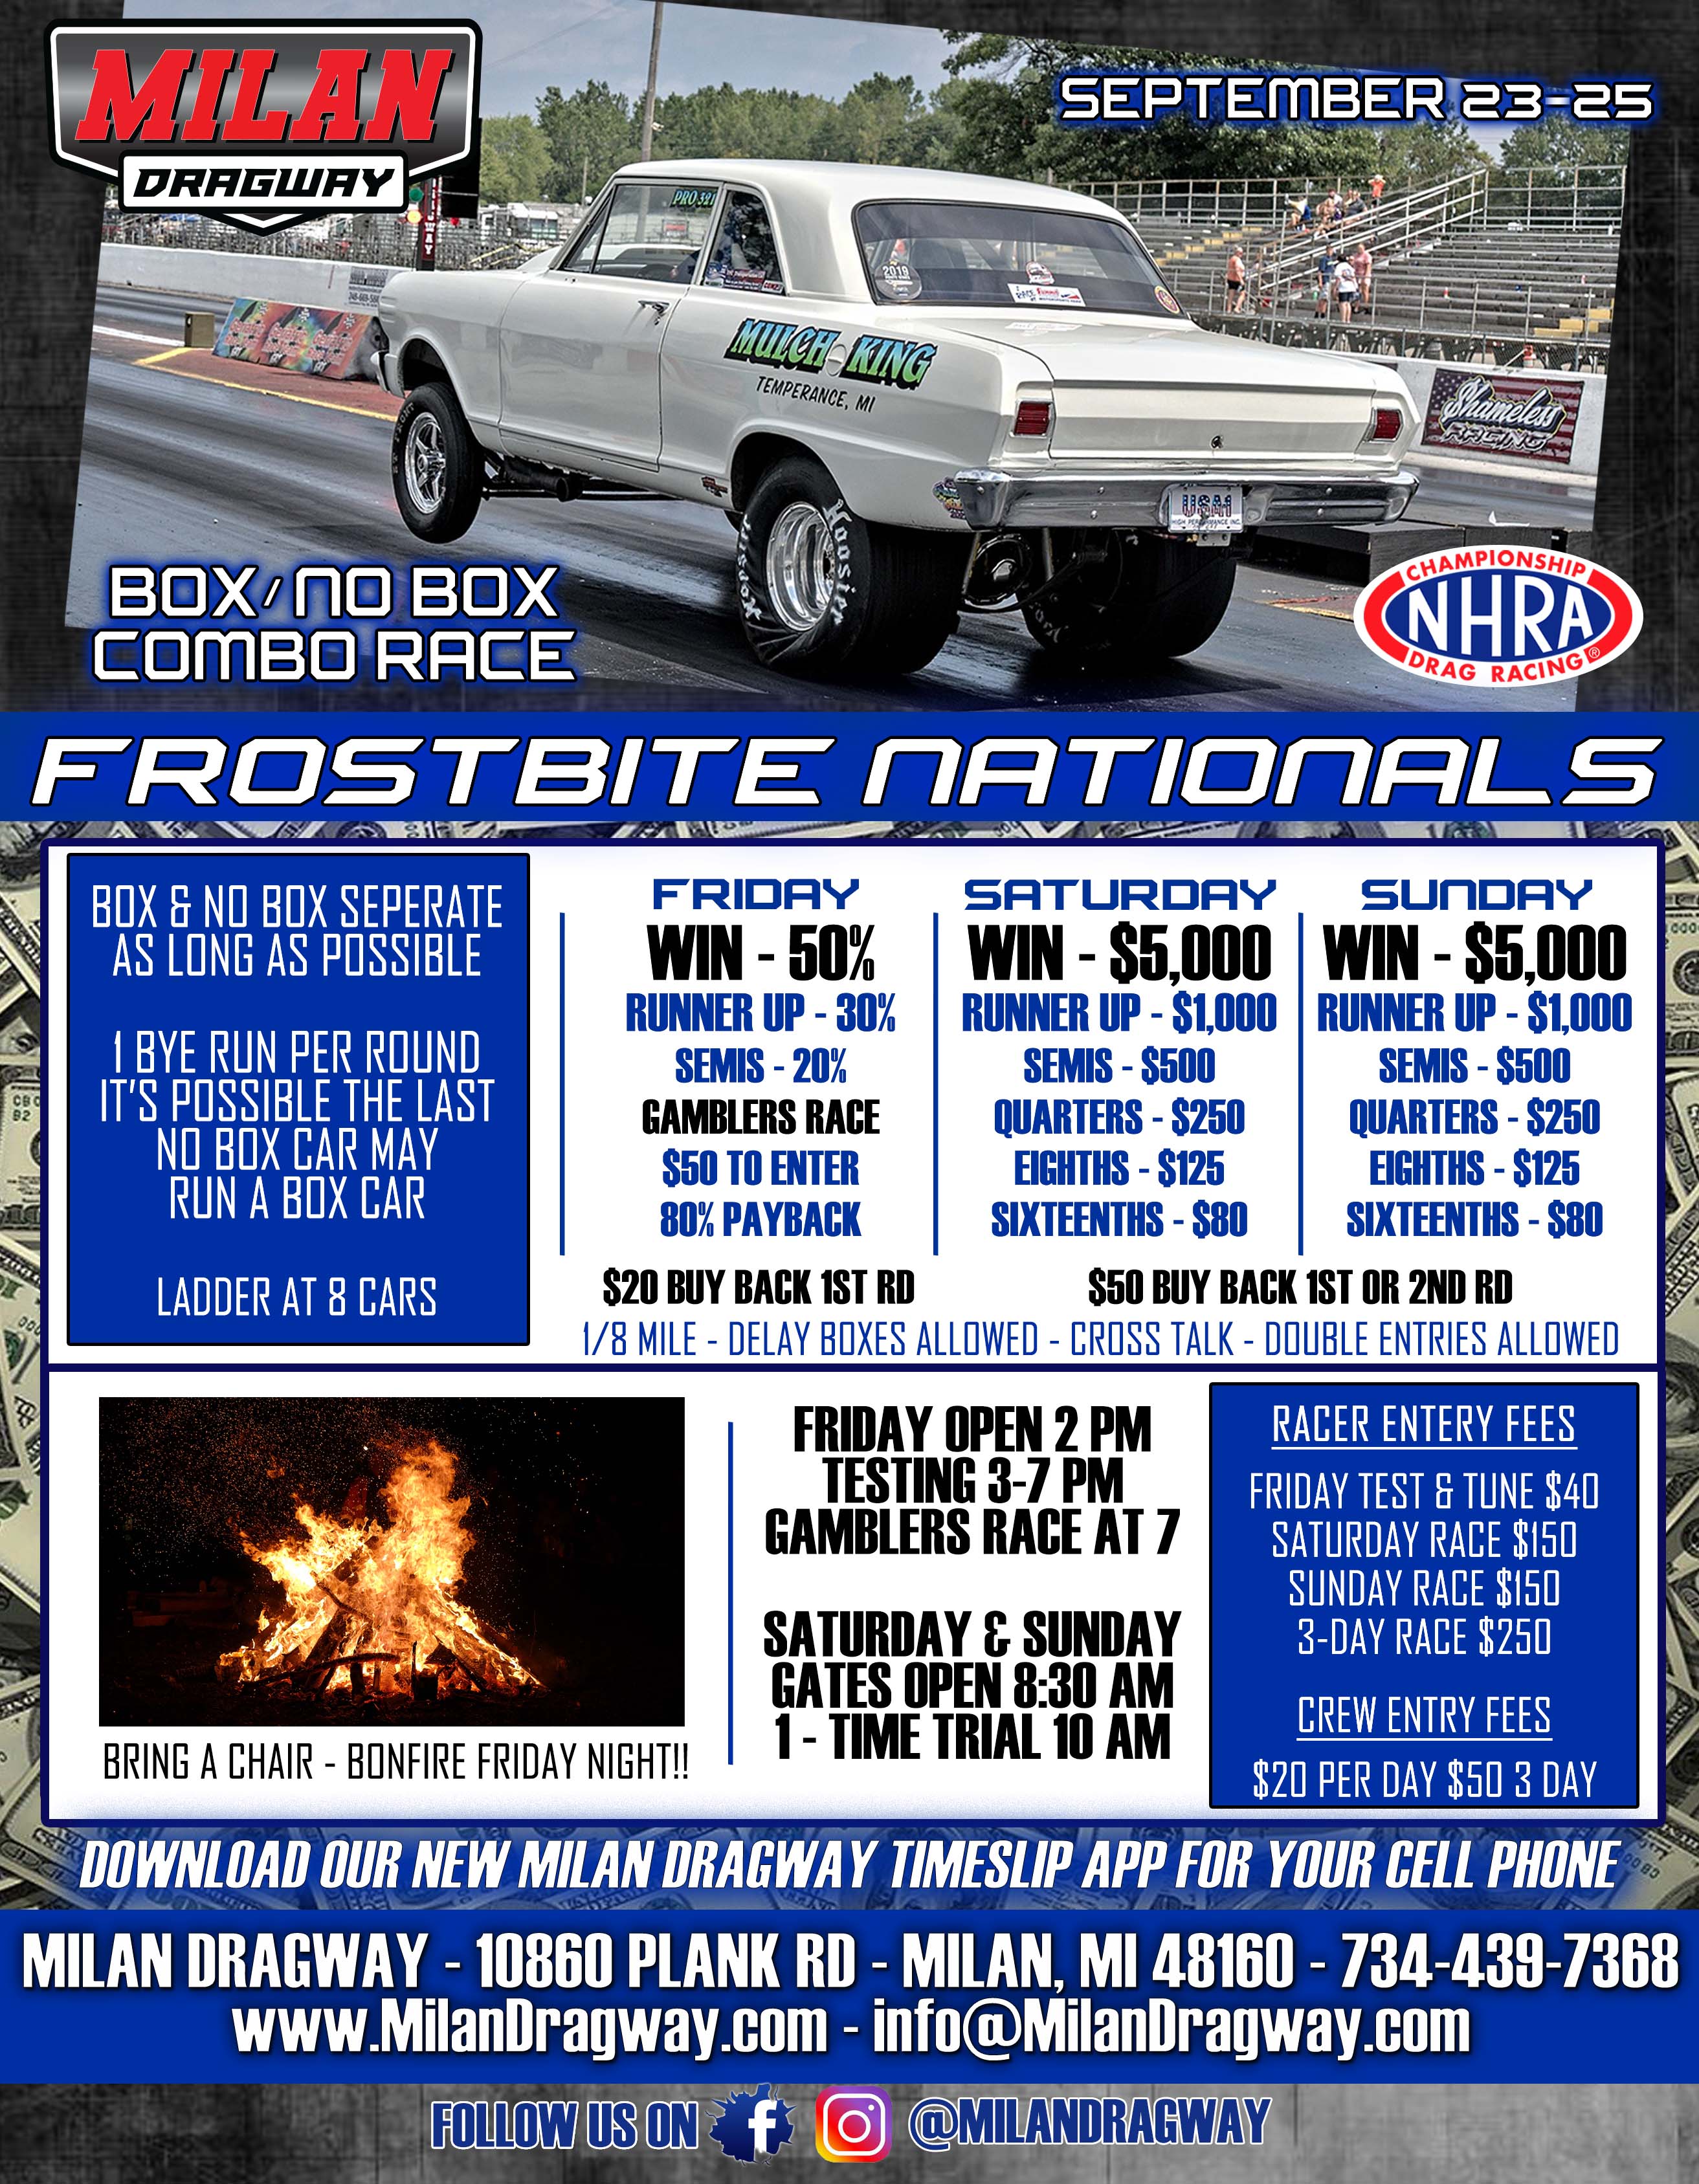 The Frostbite Nationals Are Back!